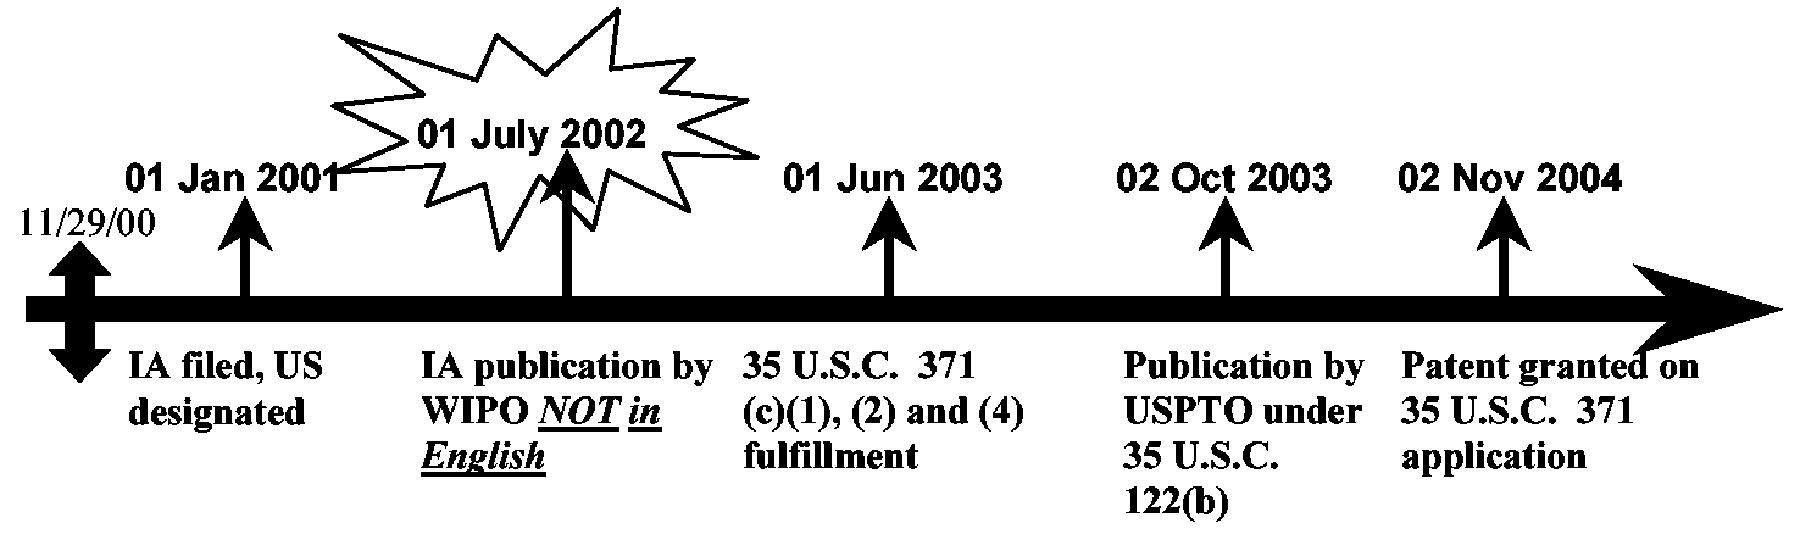 Example 5: References based on the national stage (35 U.S.C. 371) of an International Application filed on or after November 29, 2000 and which was not published in English under PCT Article 21(2).